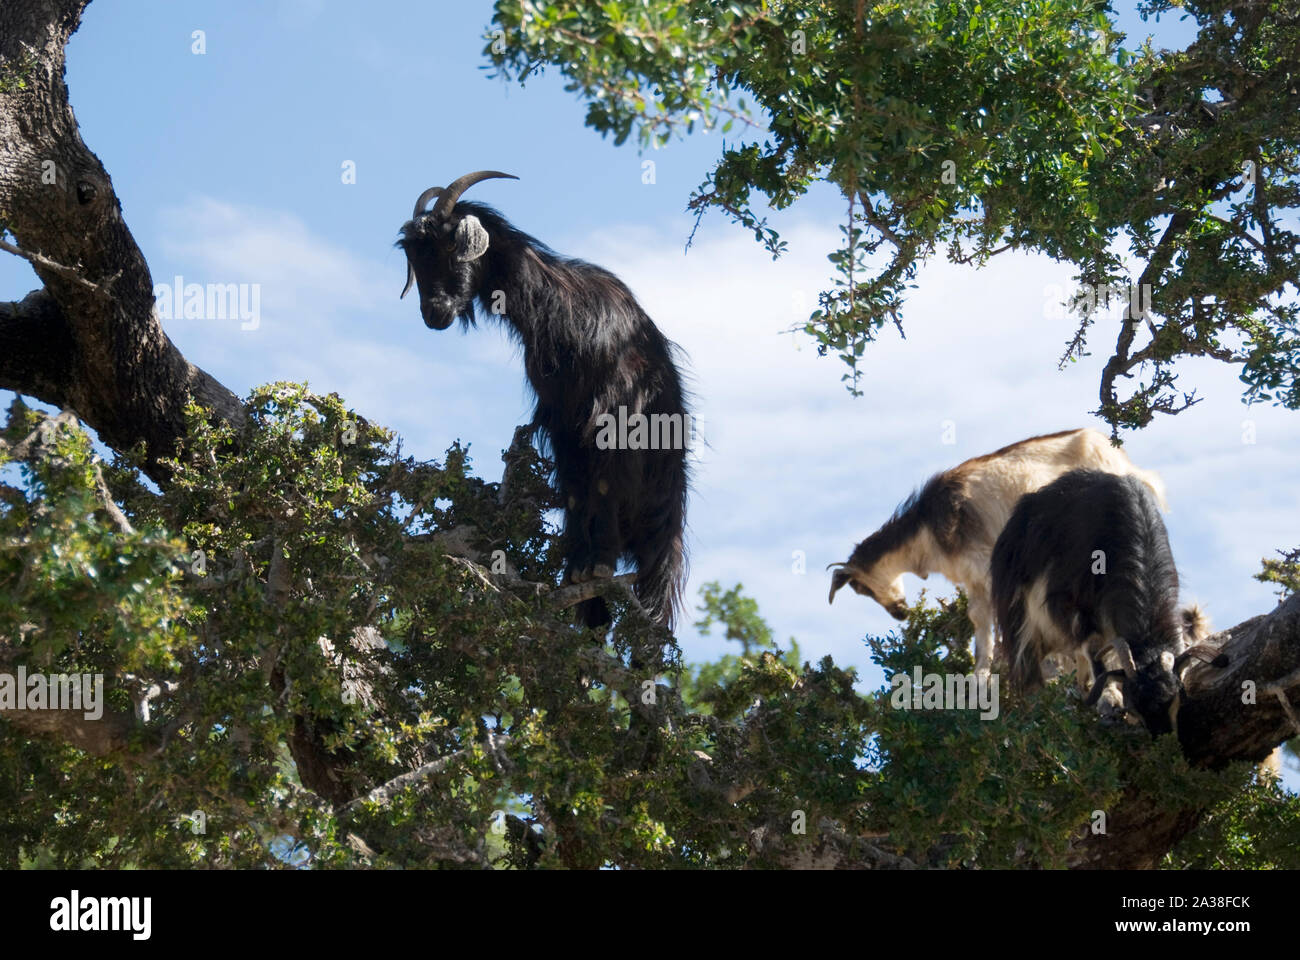 Two Cloven-hoofed goats in an Argan tree, Morocco Stock Photo